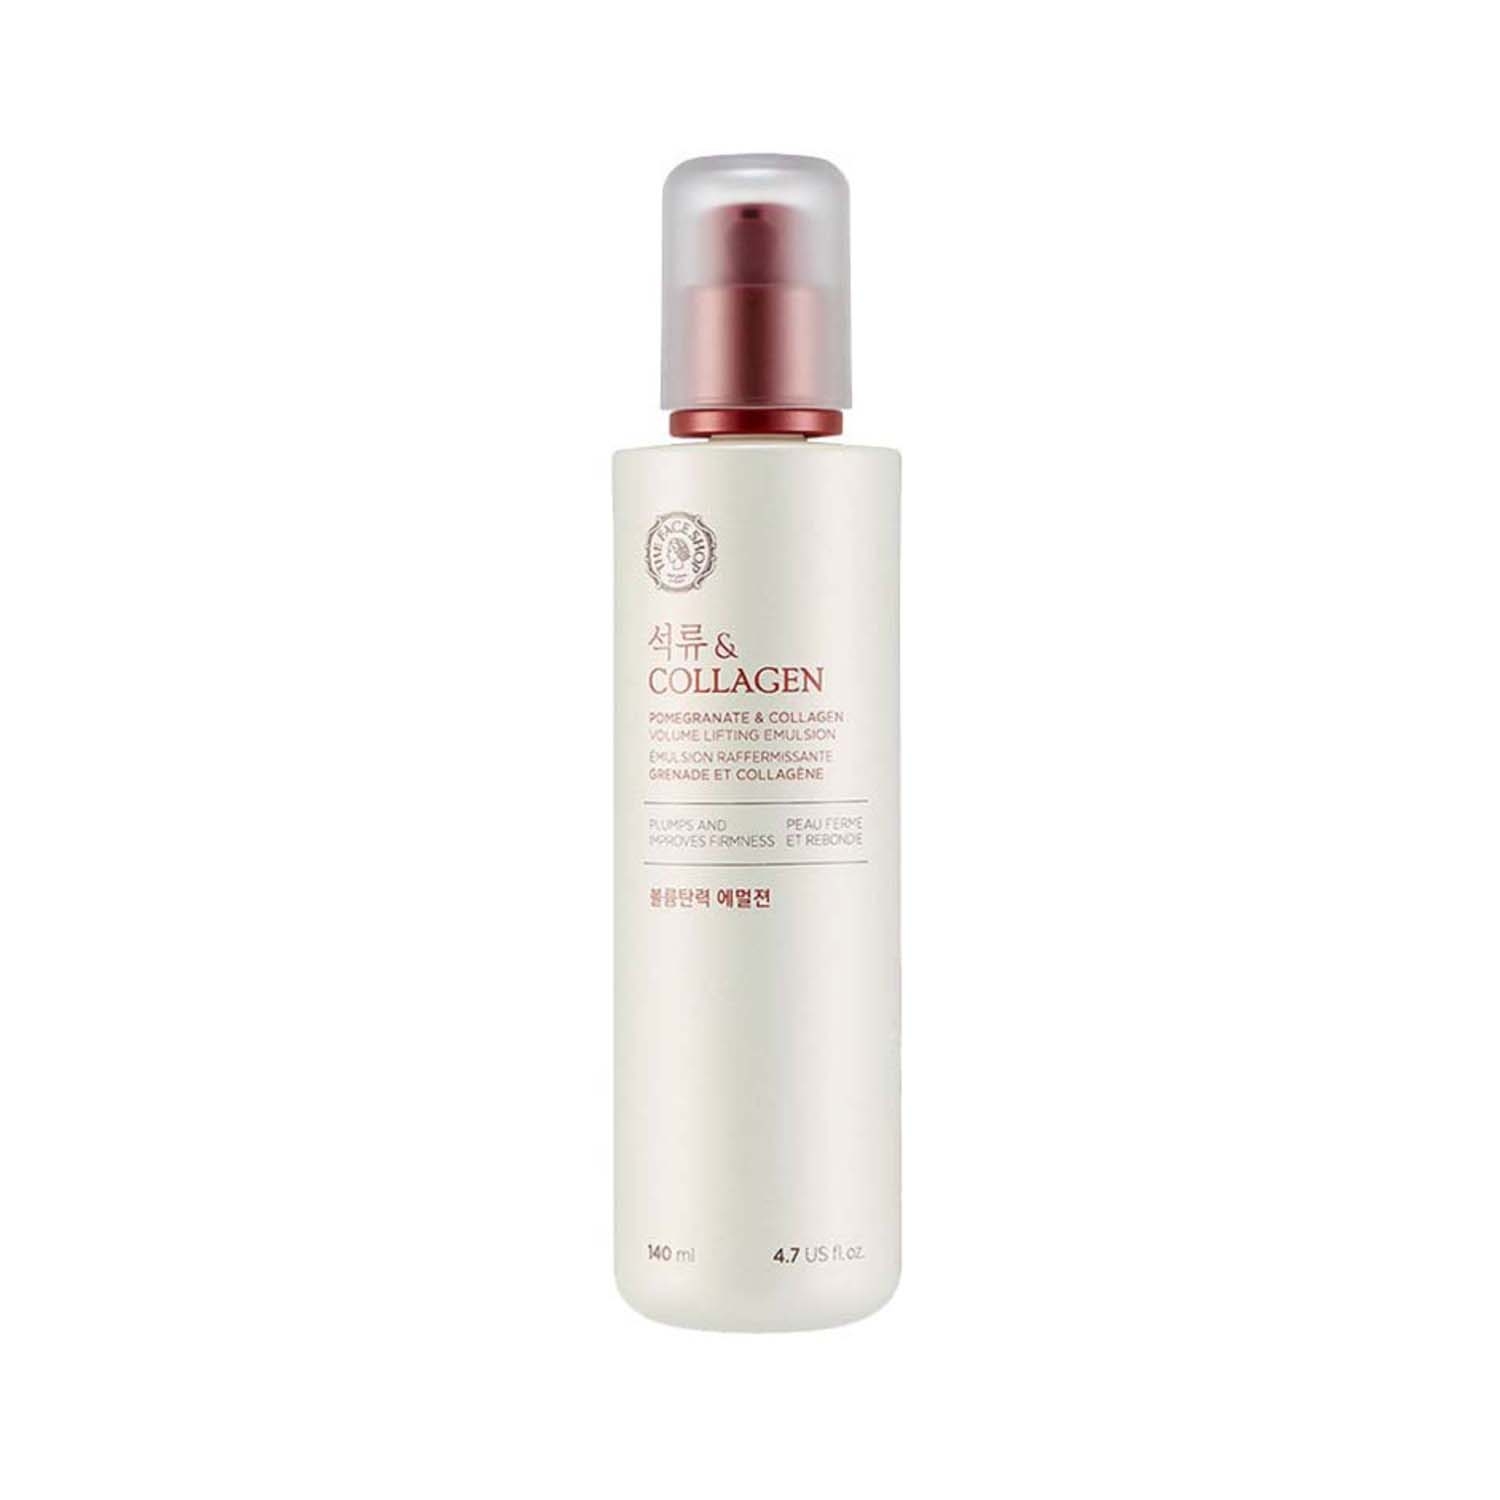 The Face Shop | The Face Shop Pomegranate & Collagen Volume Lifting Emulsion (140ml)